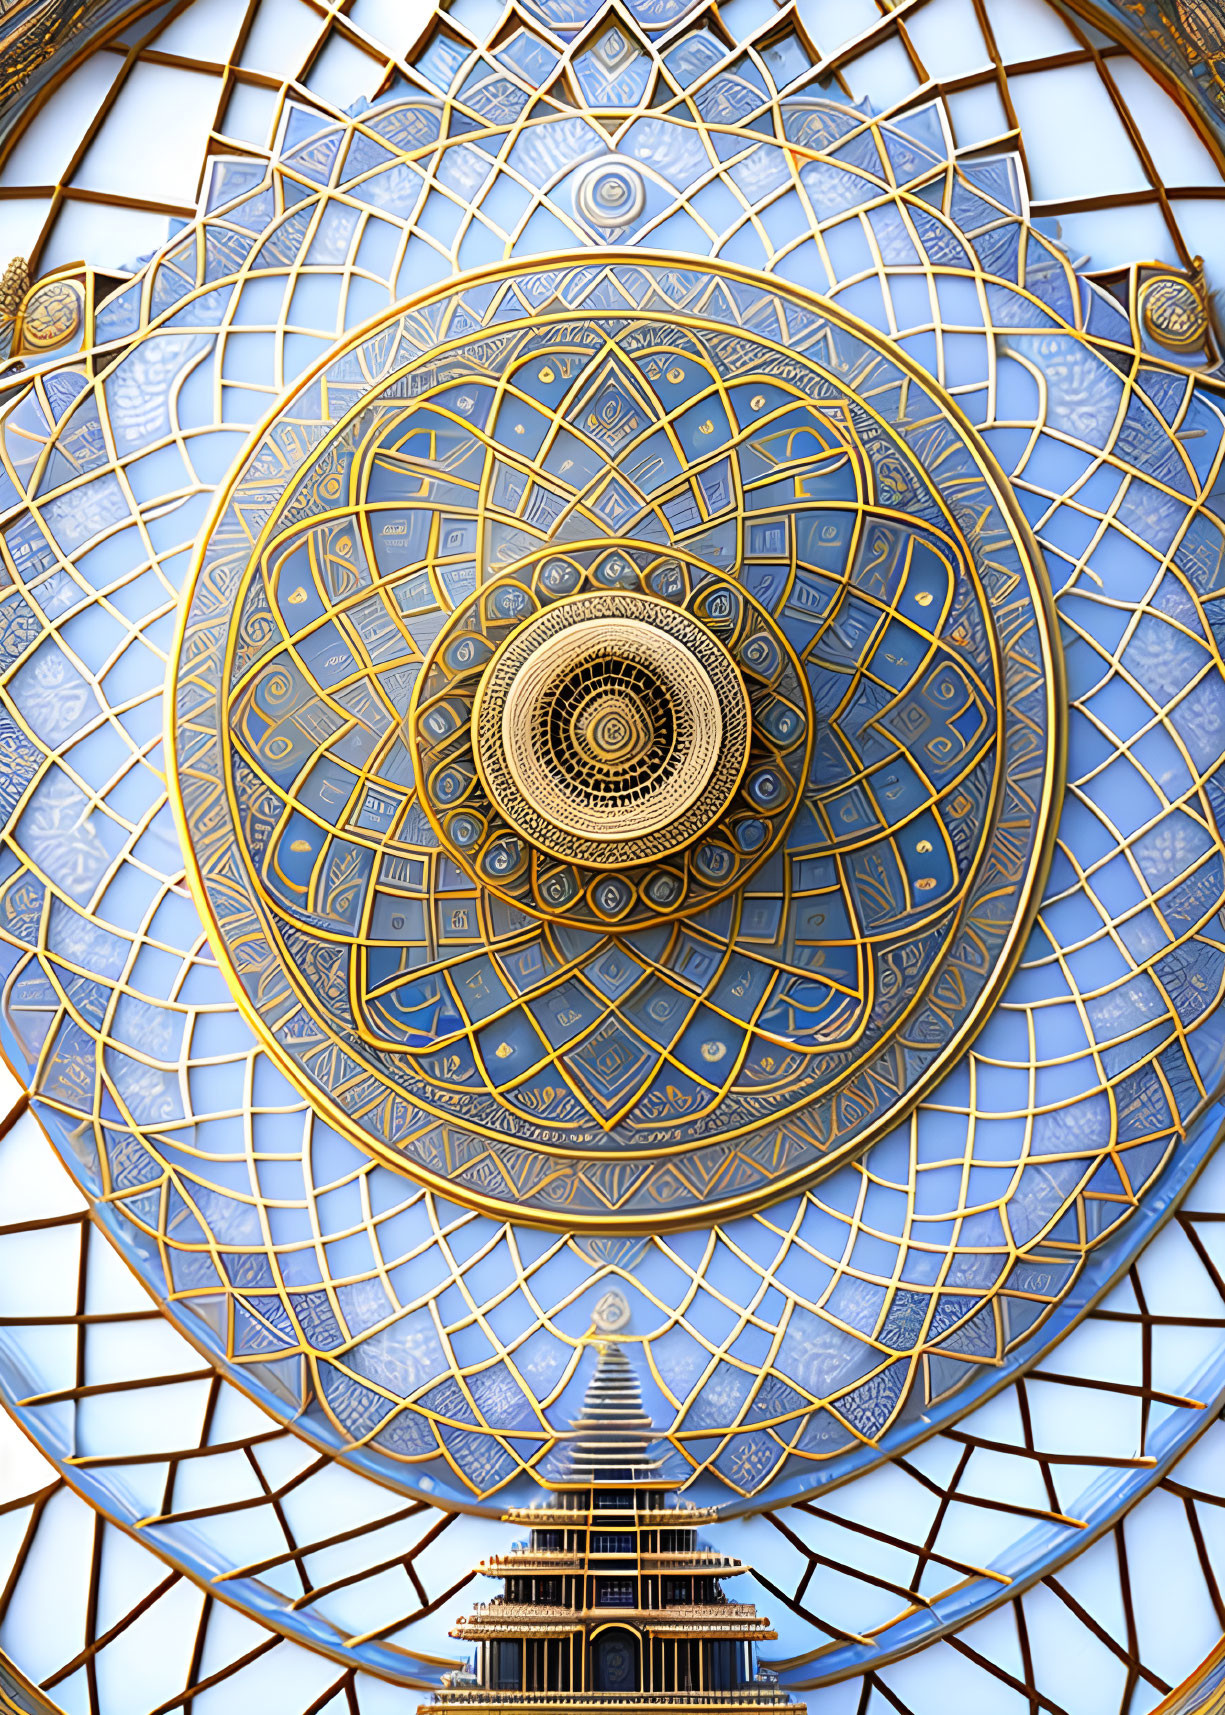 Golden Mandala with Geometric Design on Blue Background in White Ornate Structure